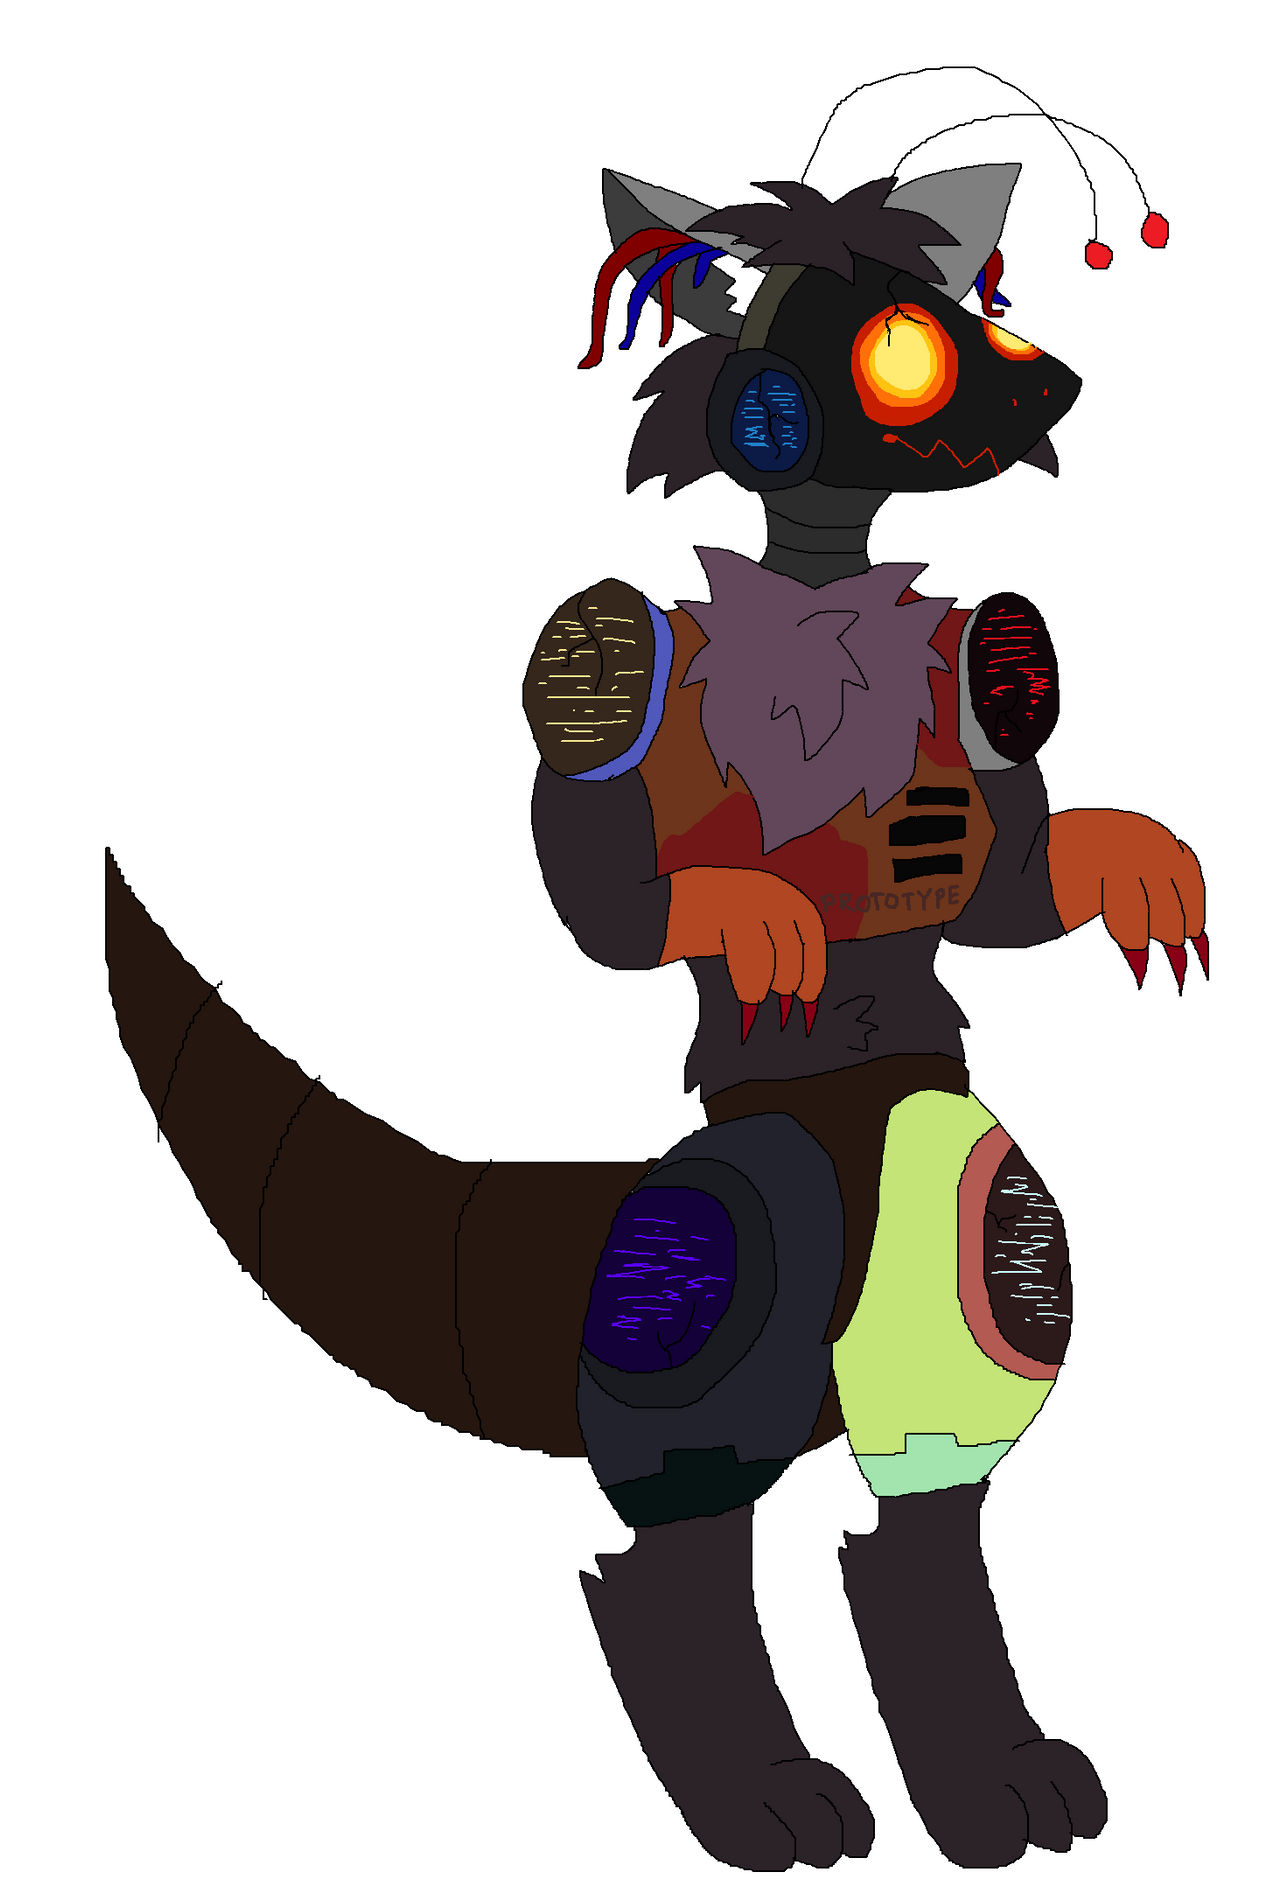 Protogen eyes are located on the side of their head. This